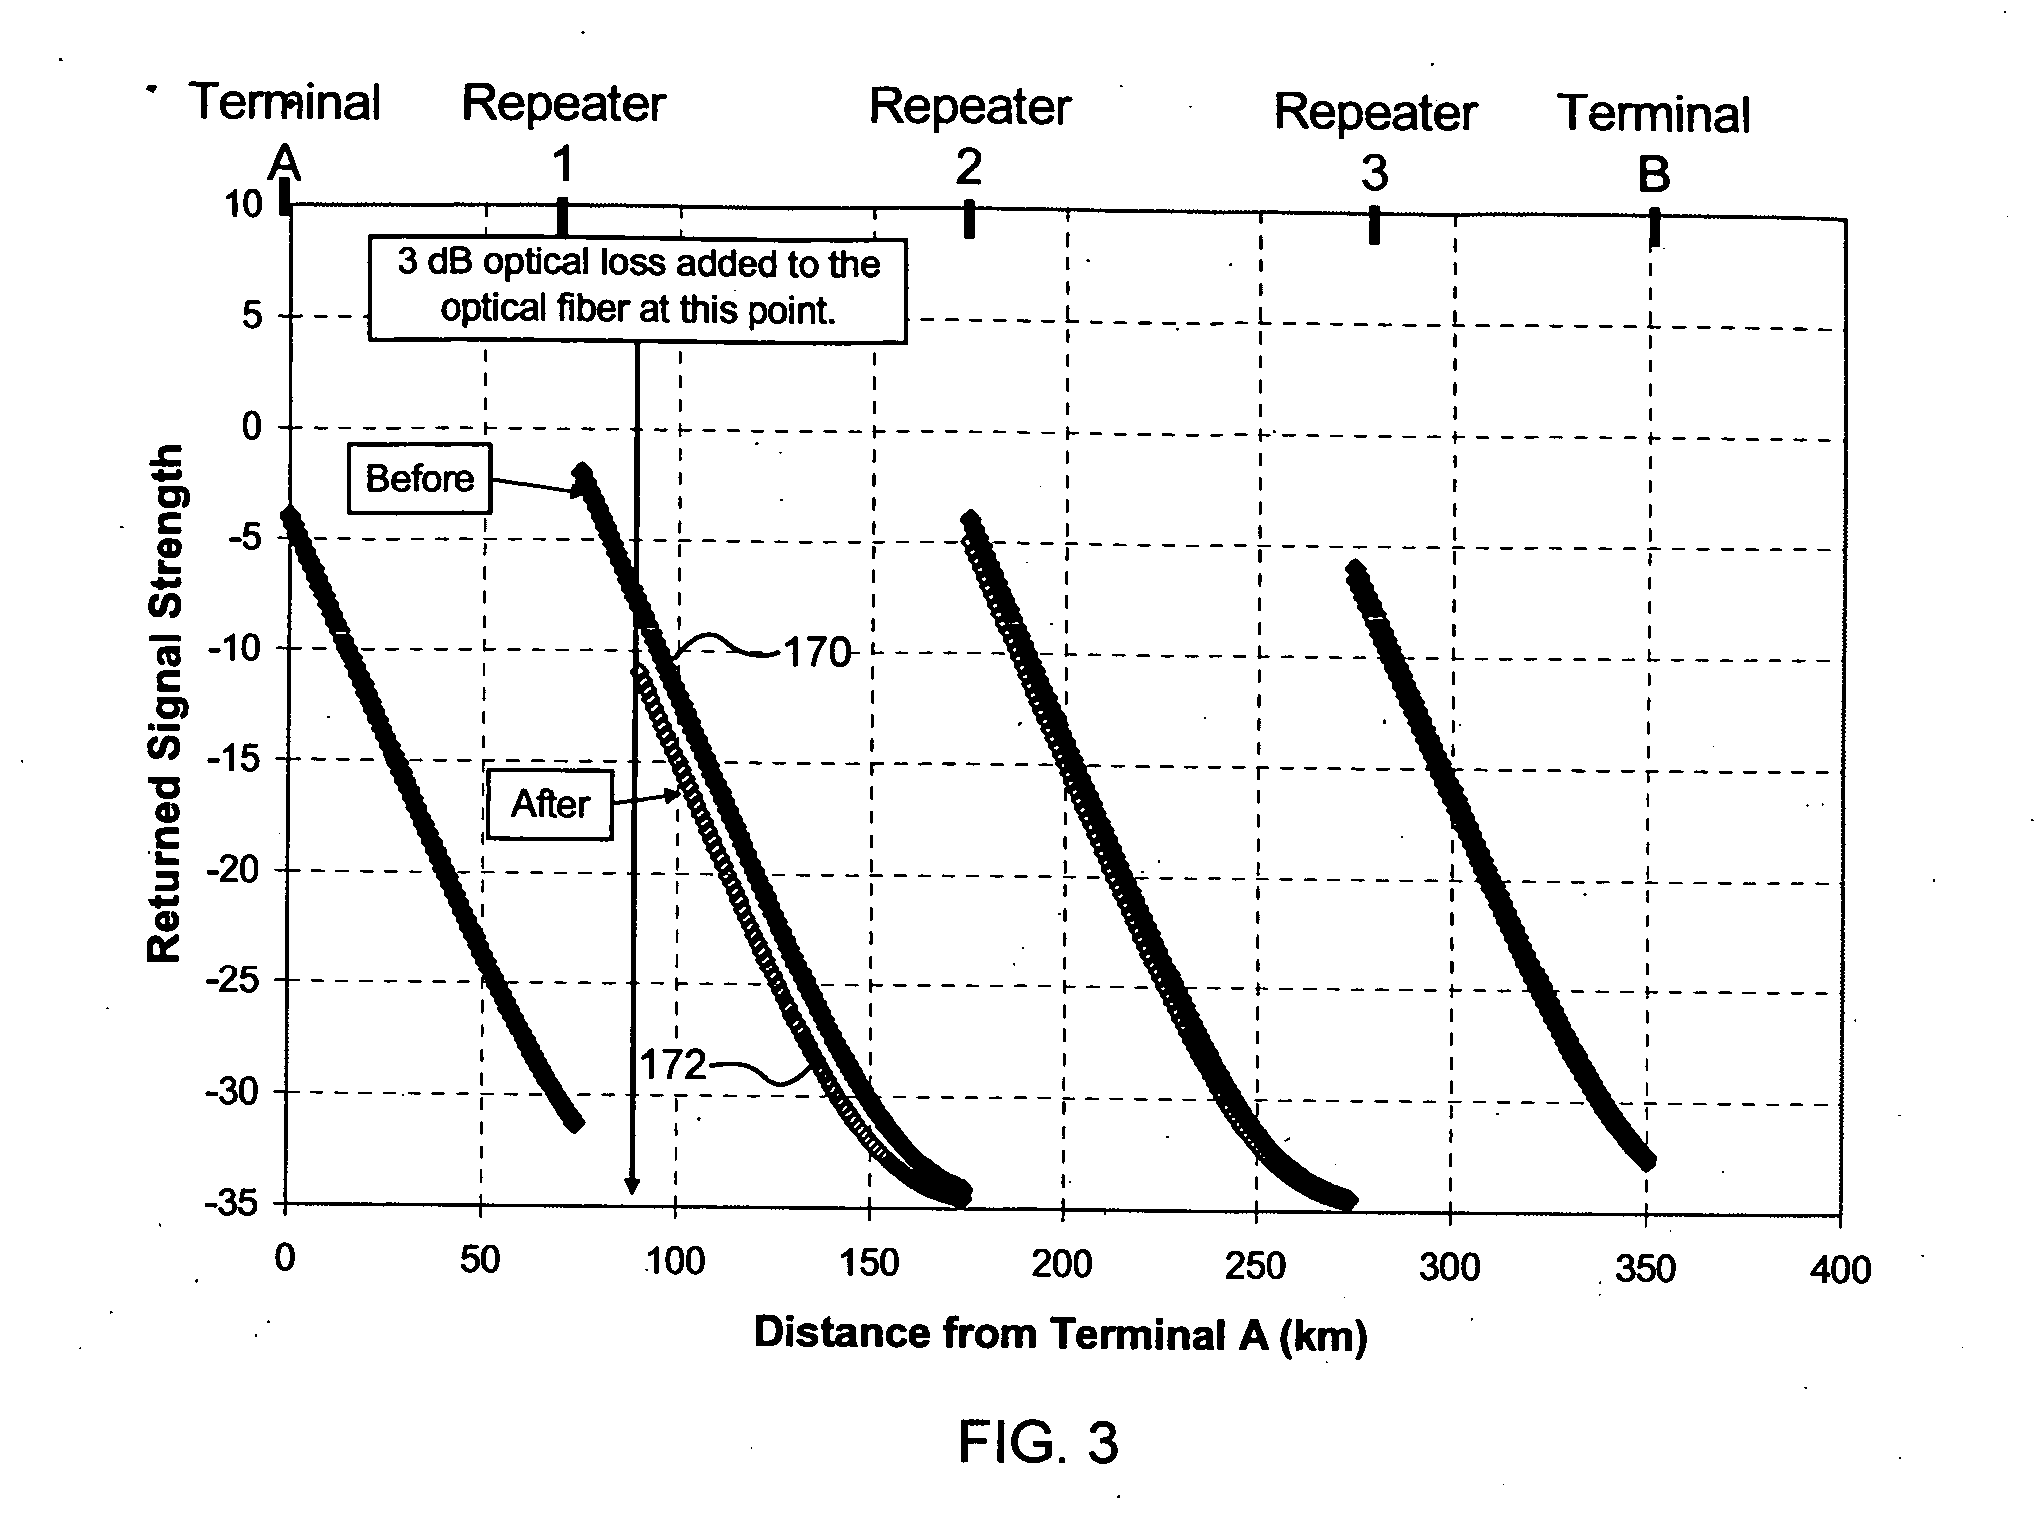 System and method for monitoring an optical communication system